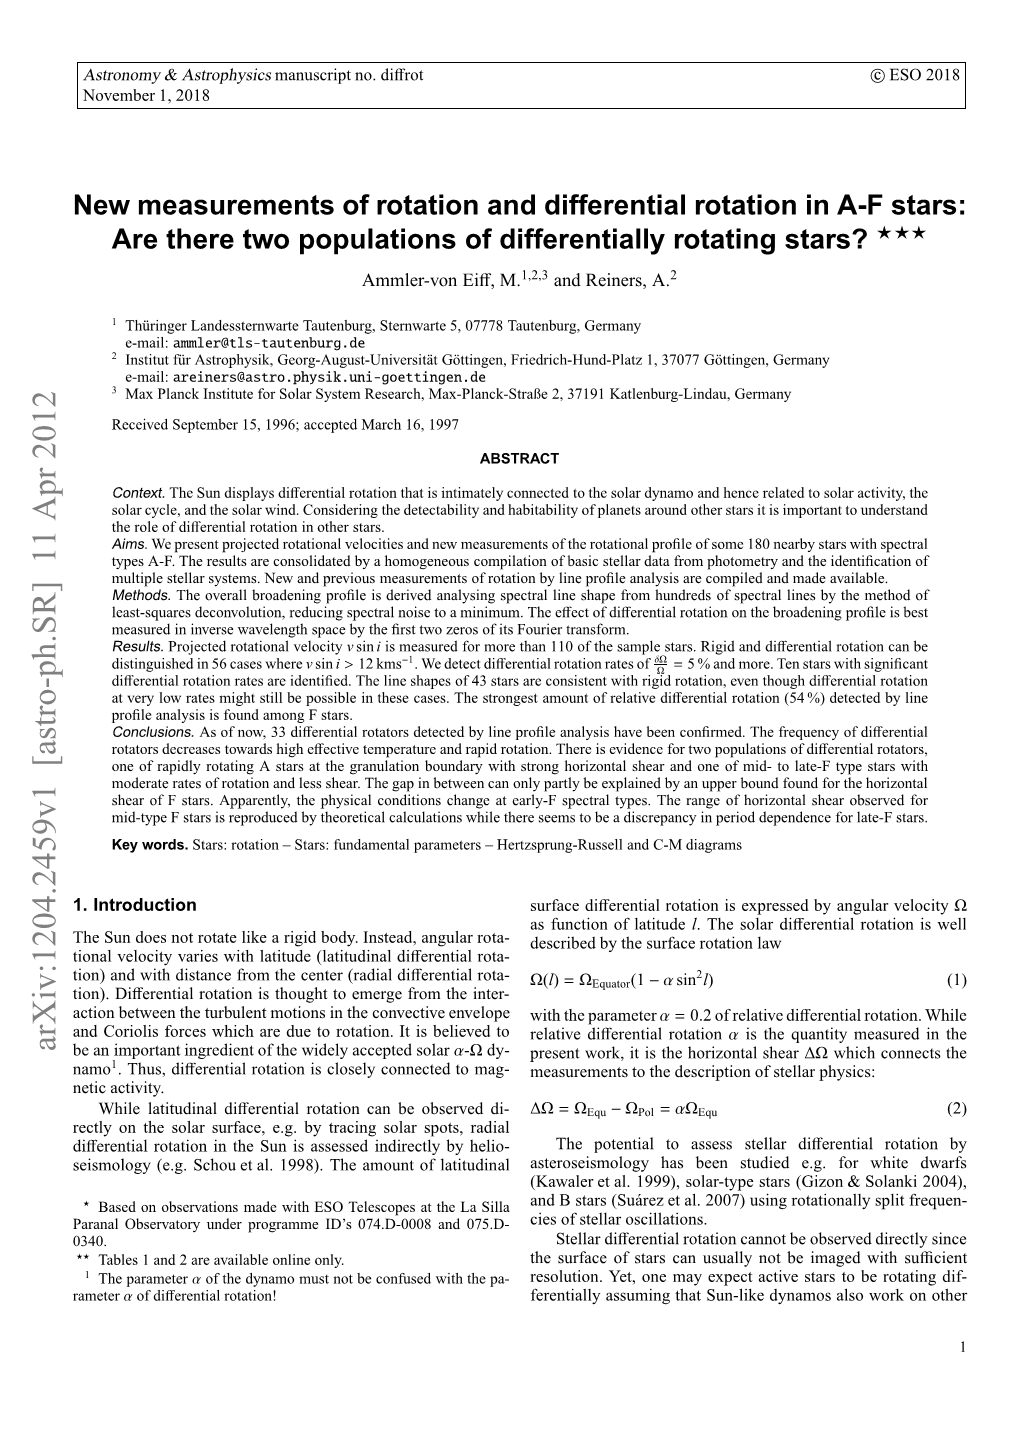 New Measurements of Rotation and Differential Rotation in AF Stars: Are There Two Populations of Differentially Rotating Stars?